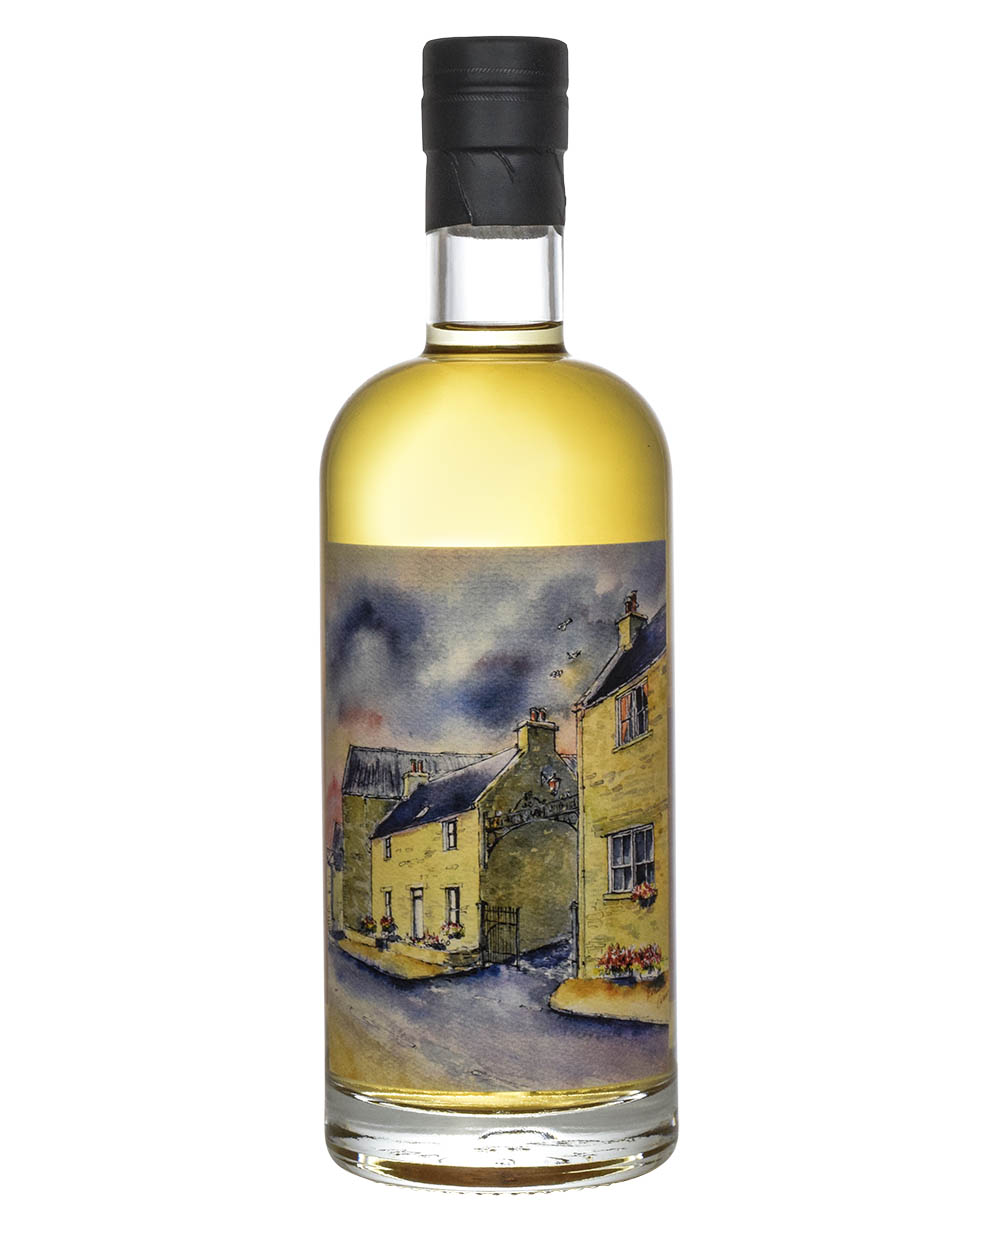 Orkney Whieksy 12 Years Old Finest Whisky Berlin 2006 Back Must Have Malts MHM